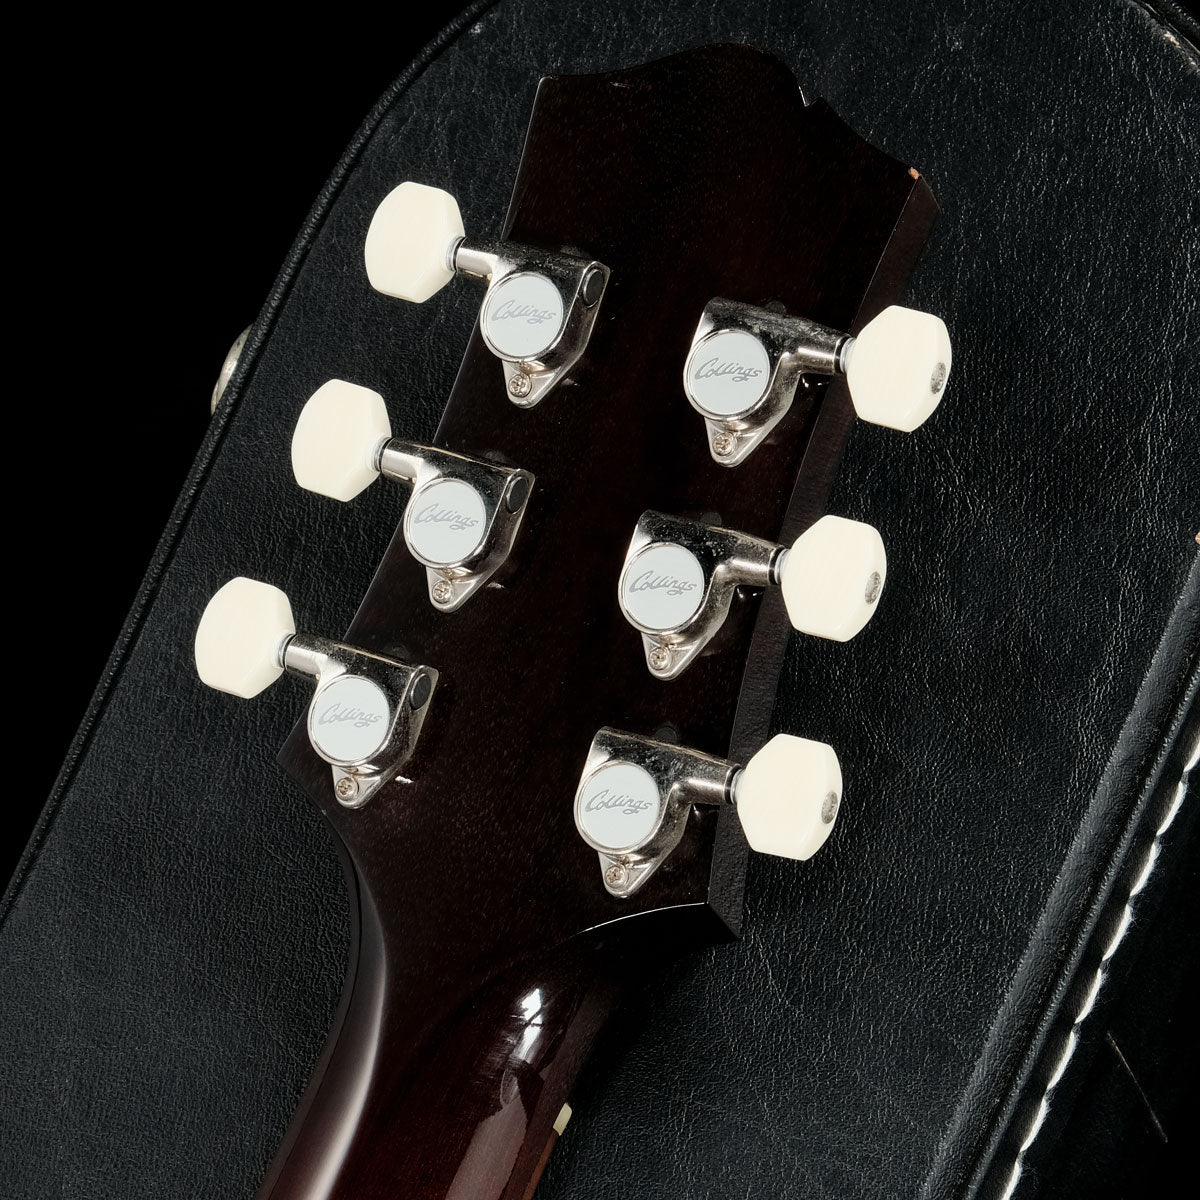 [SN 7314] USED COLLINGS / 290 2008 [05]